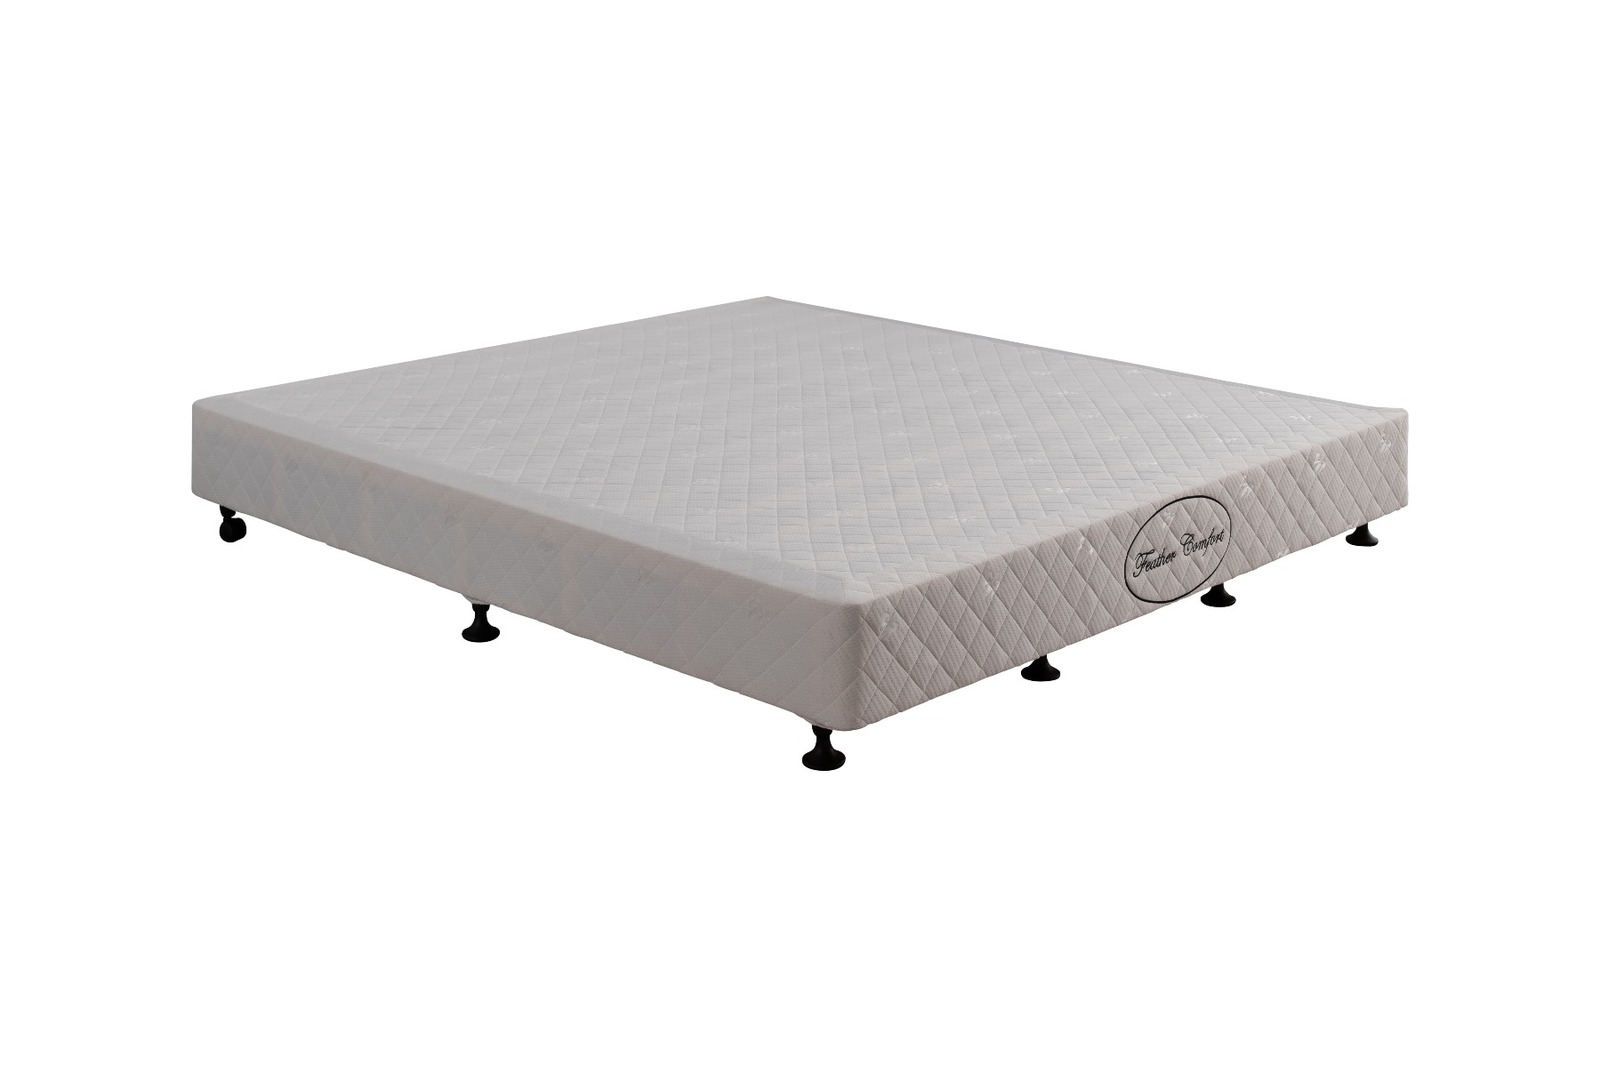 plywood base for queen mattress